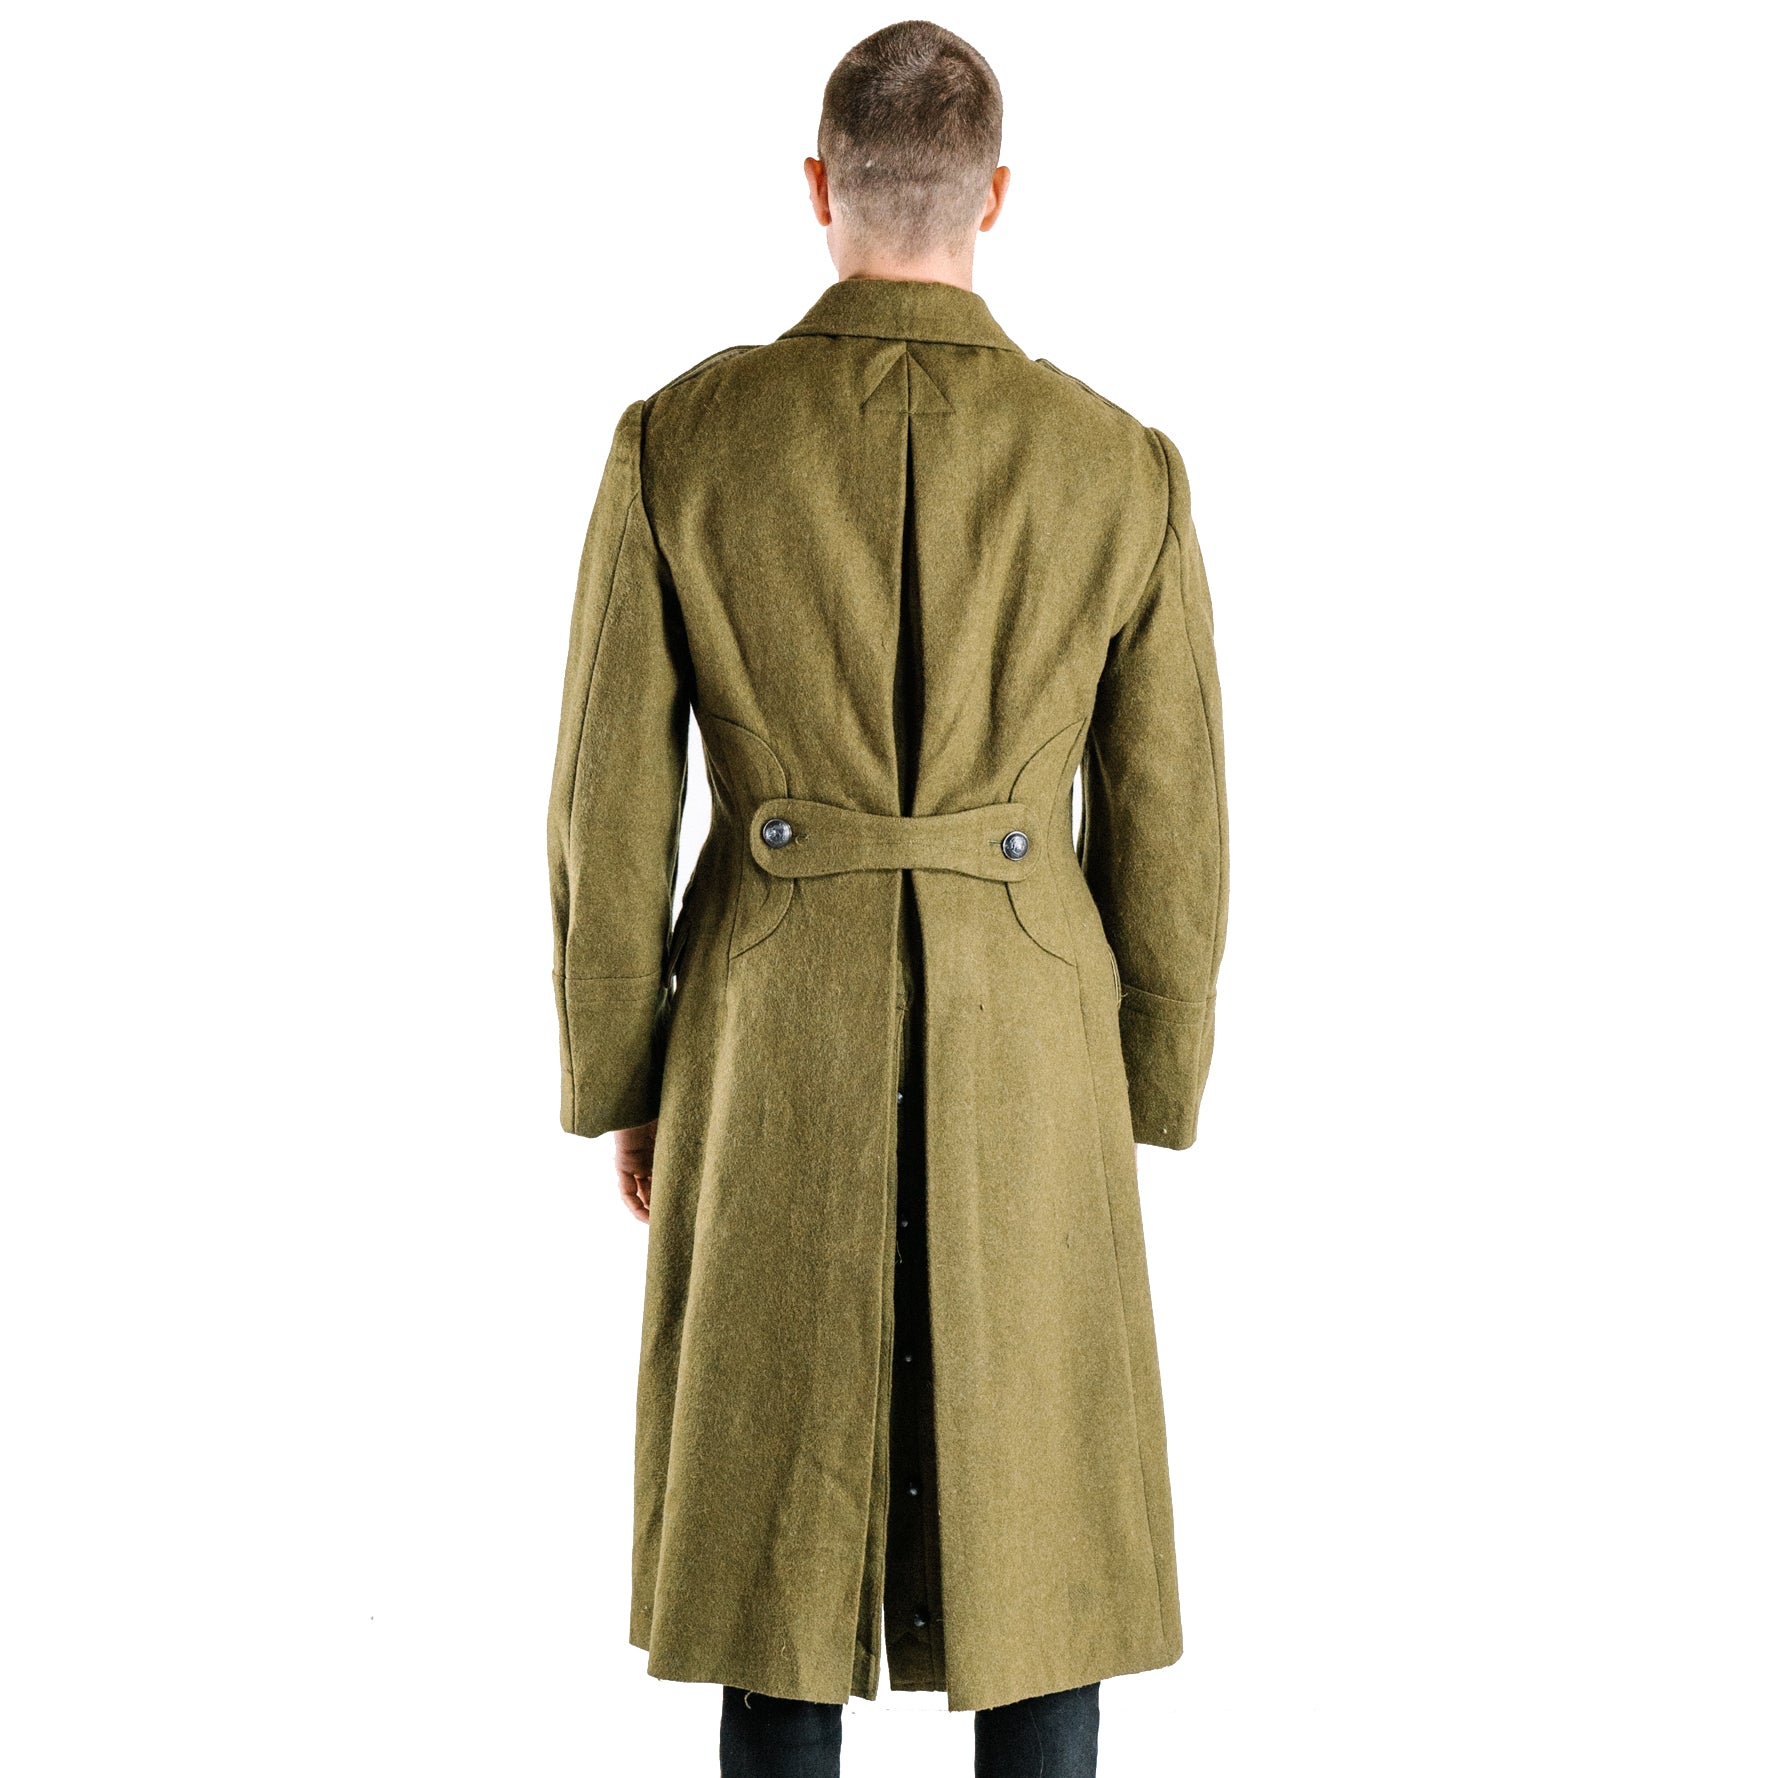 Romanian Military Vintage Wool Greatcoat | Forces Uniform and Kit